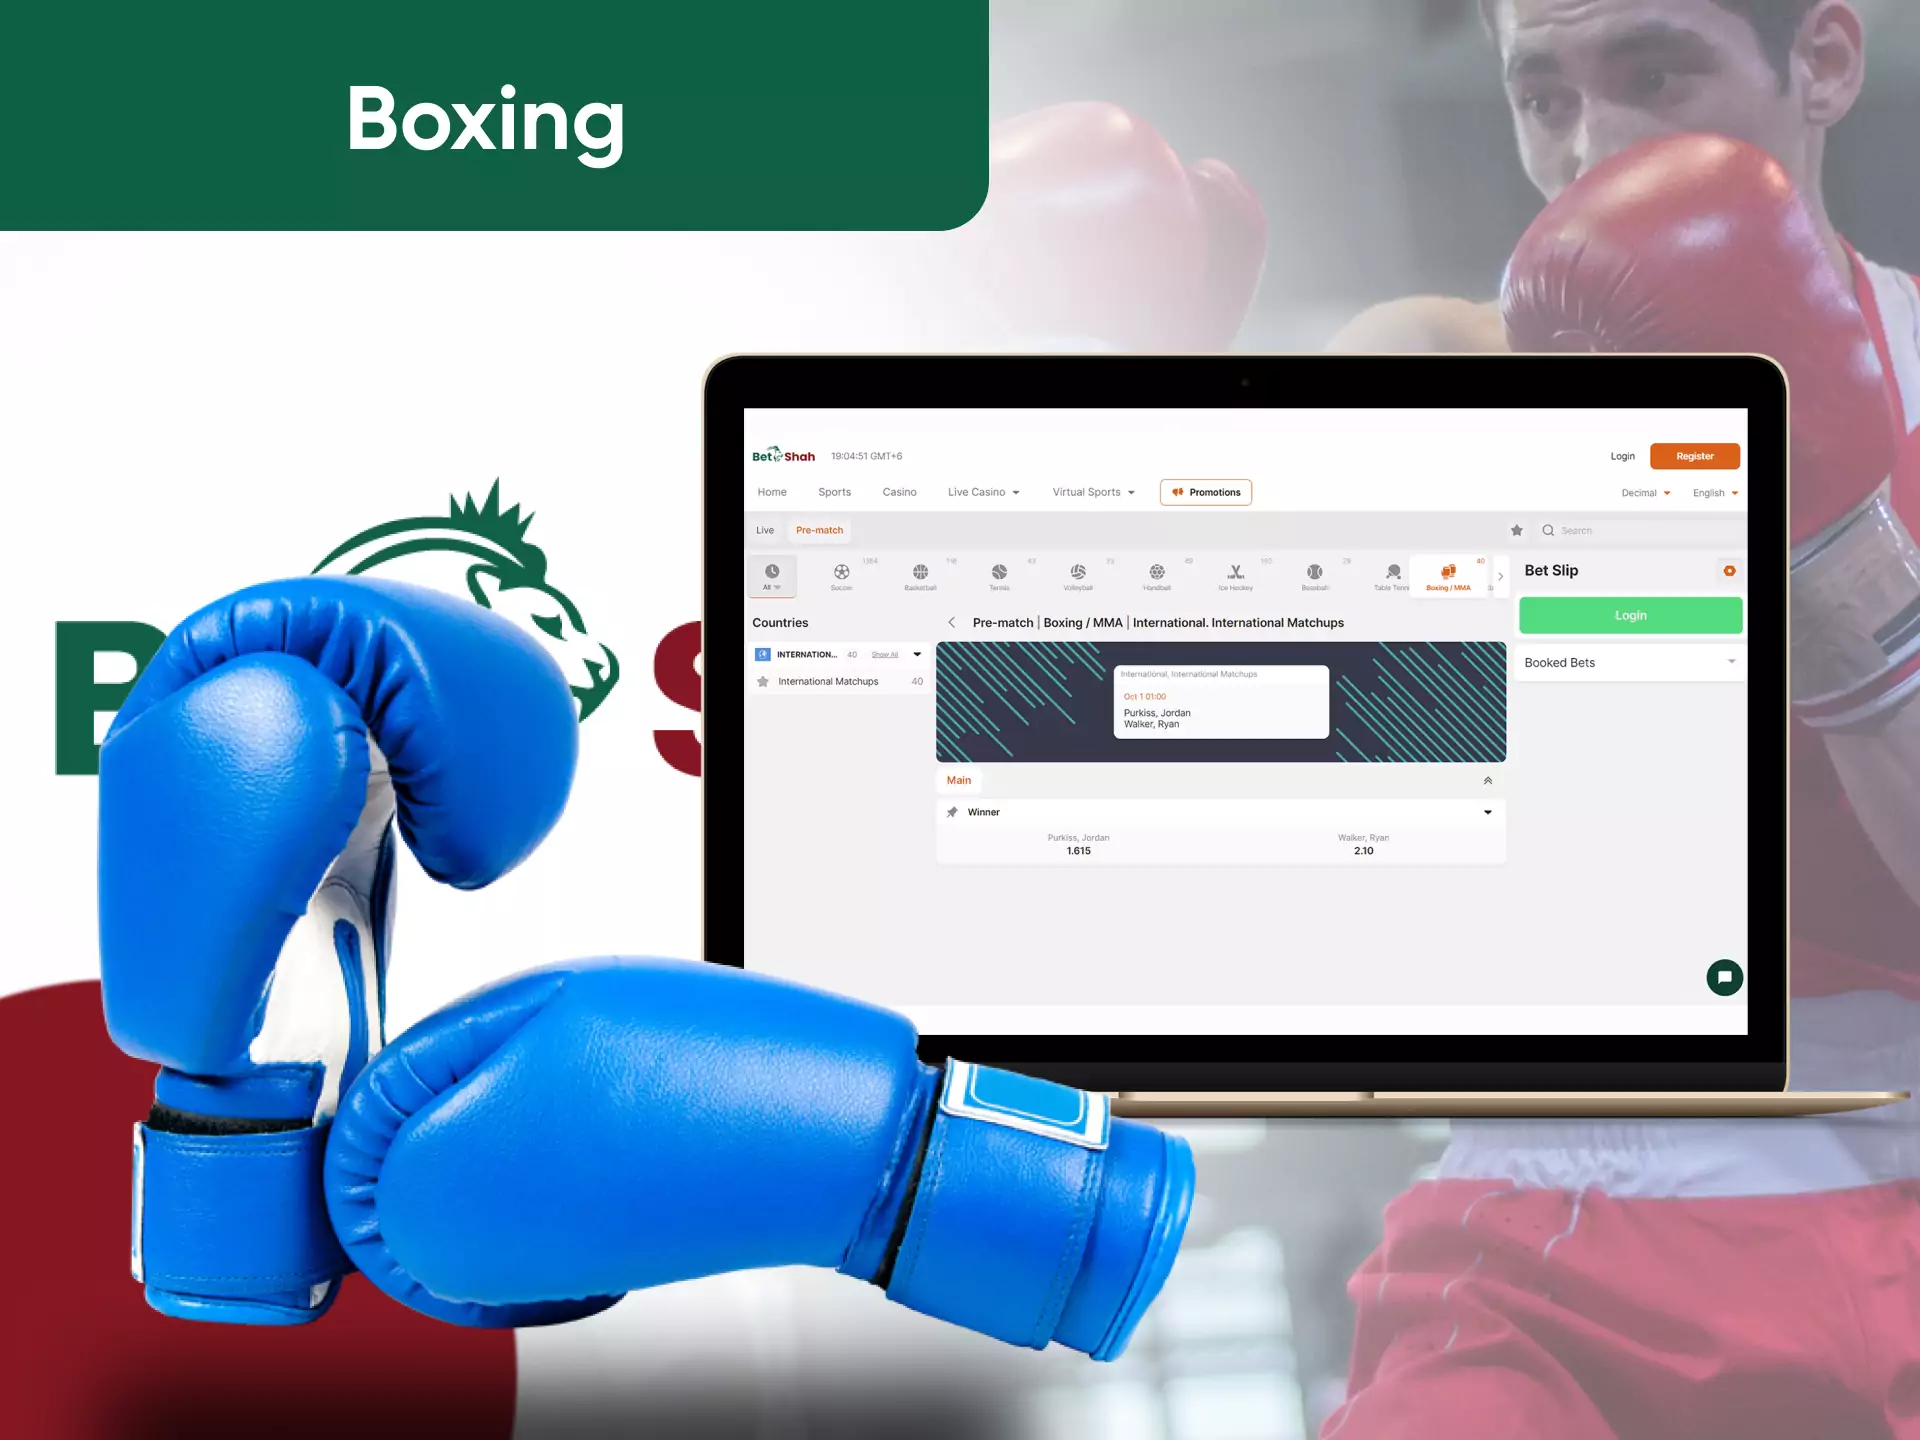 On Betshah, you can bet on boxing fights.